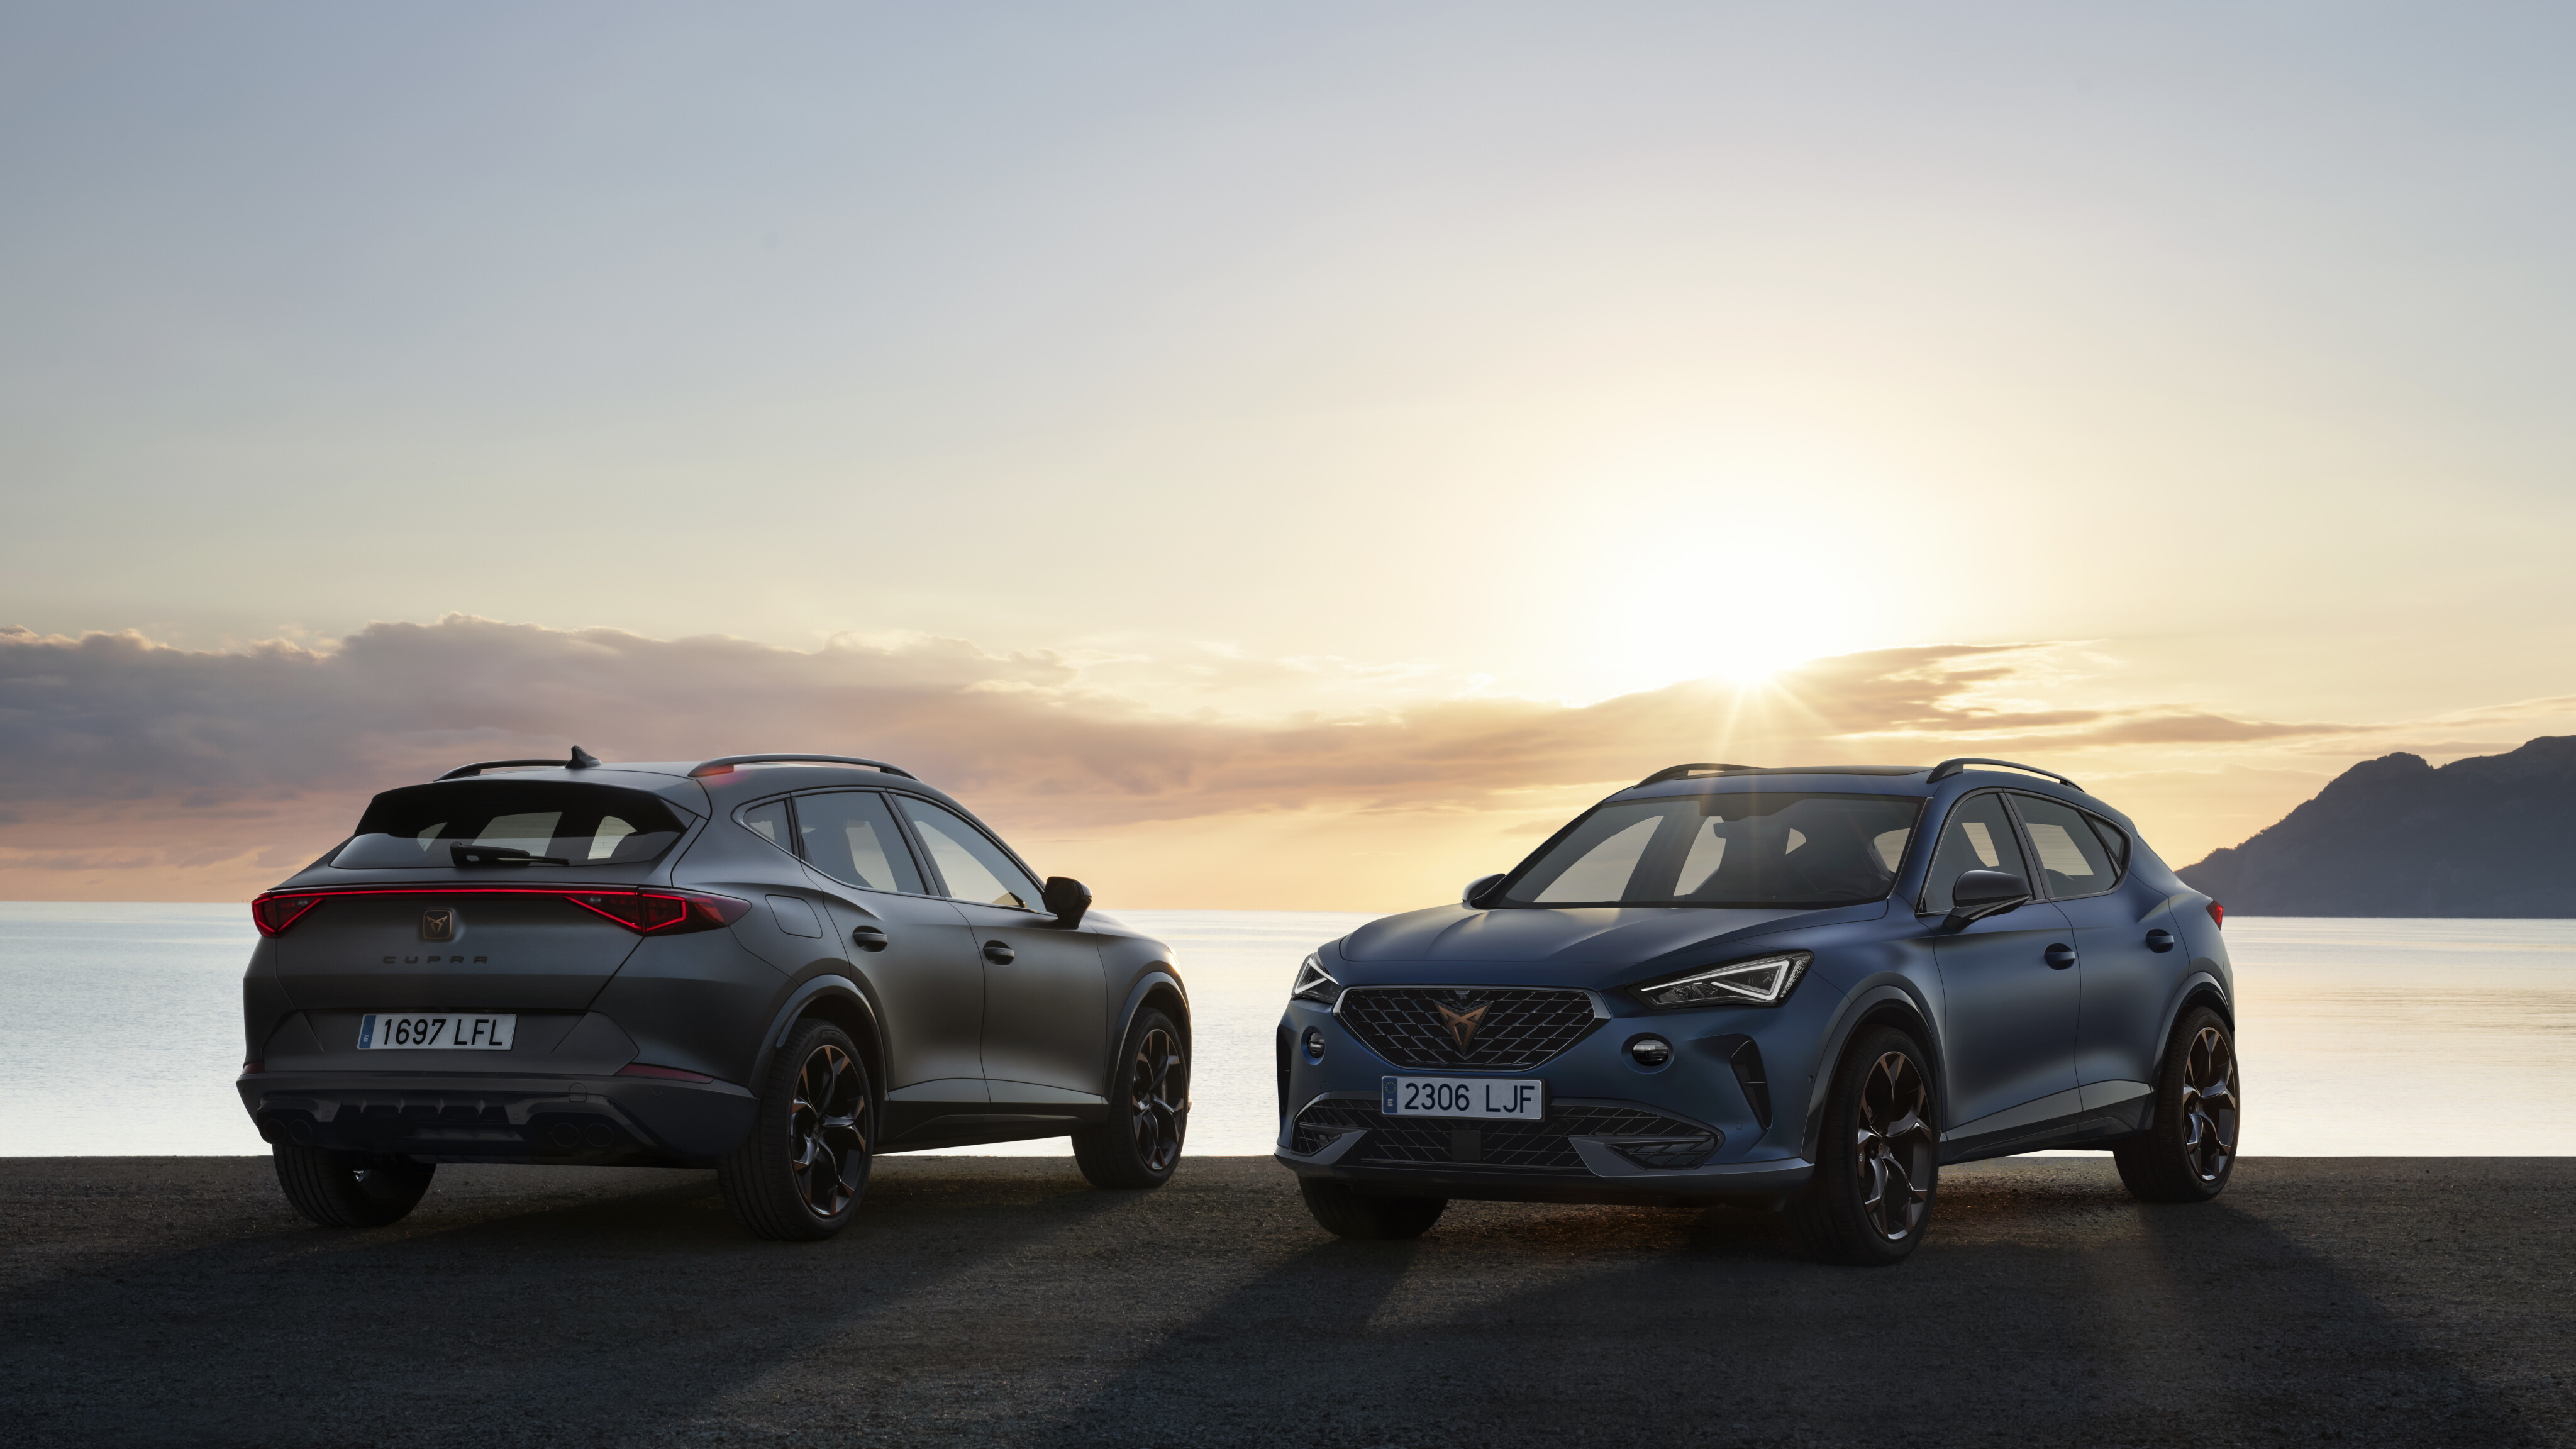 Cupra Aims To Sell 70,000 Tavascan Electric SUVs A Year